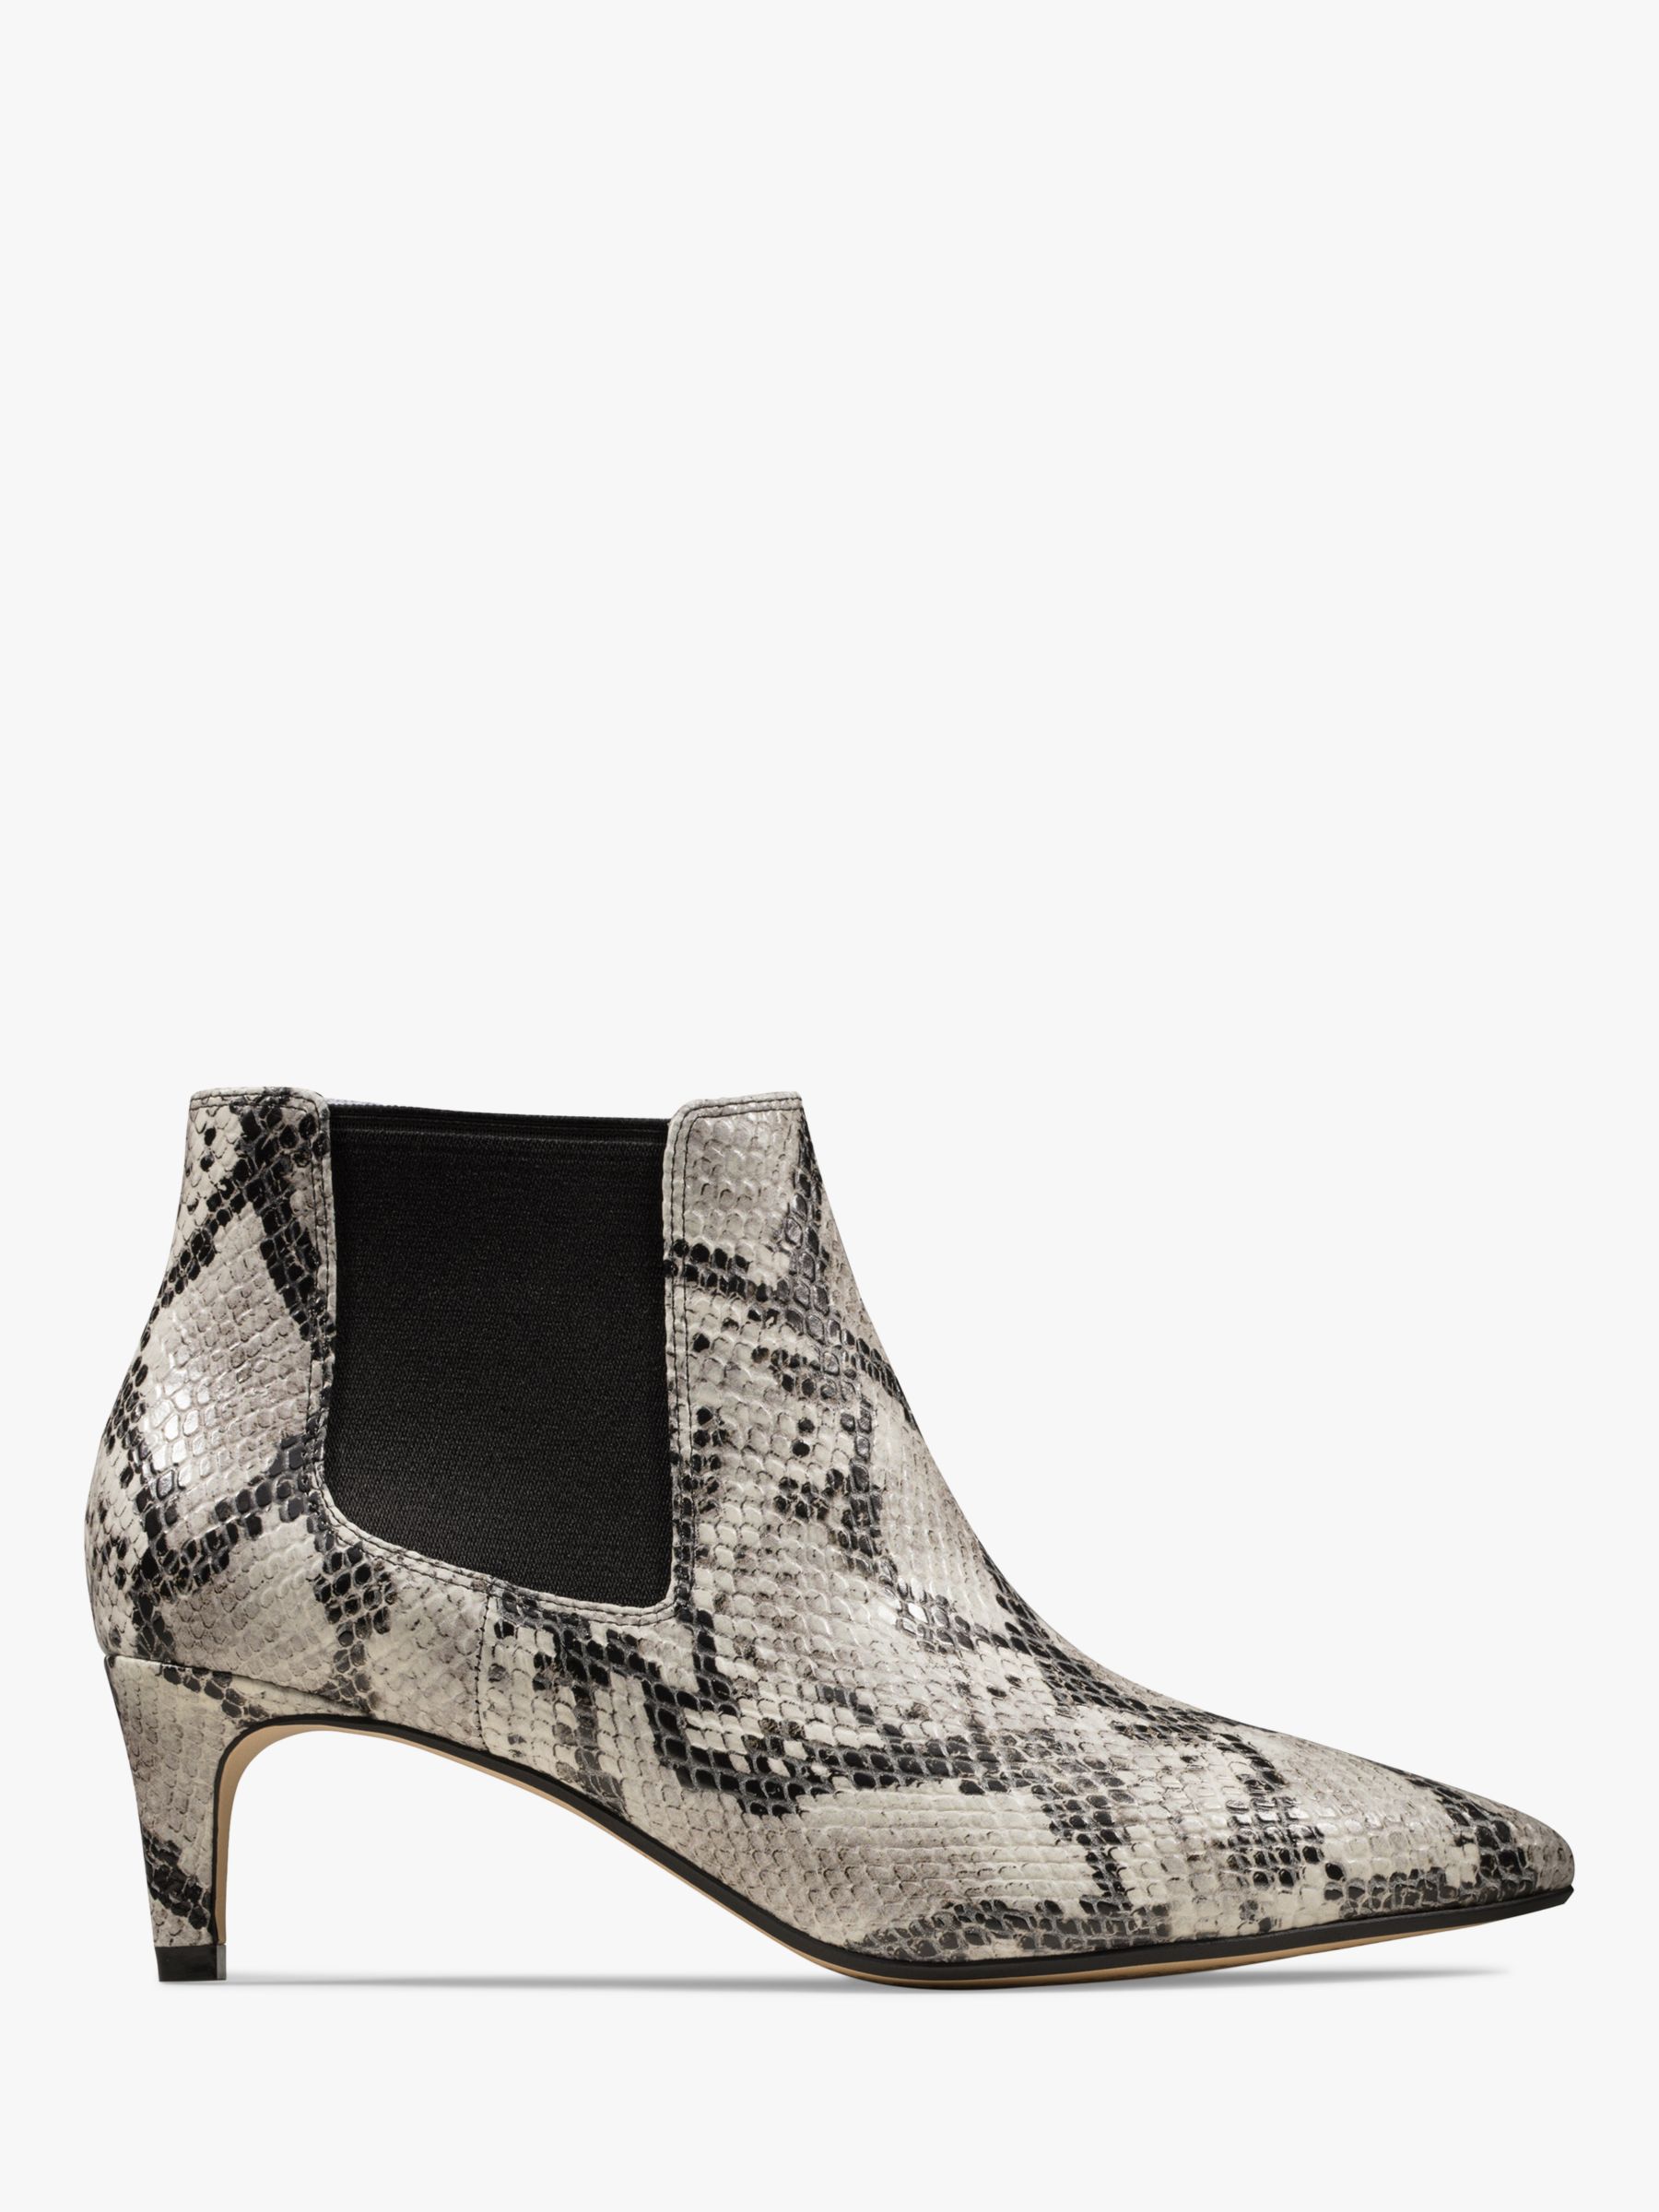 clarks grey suede ankle boots